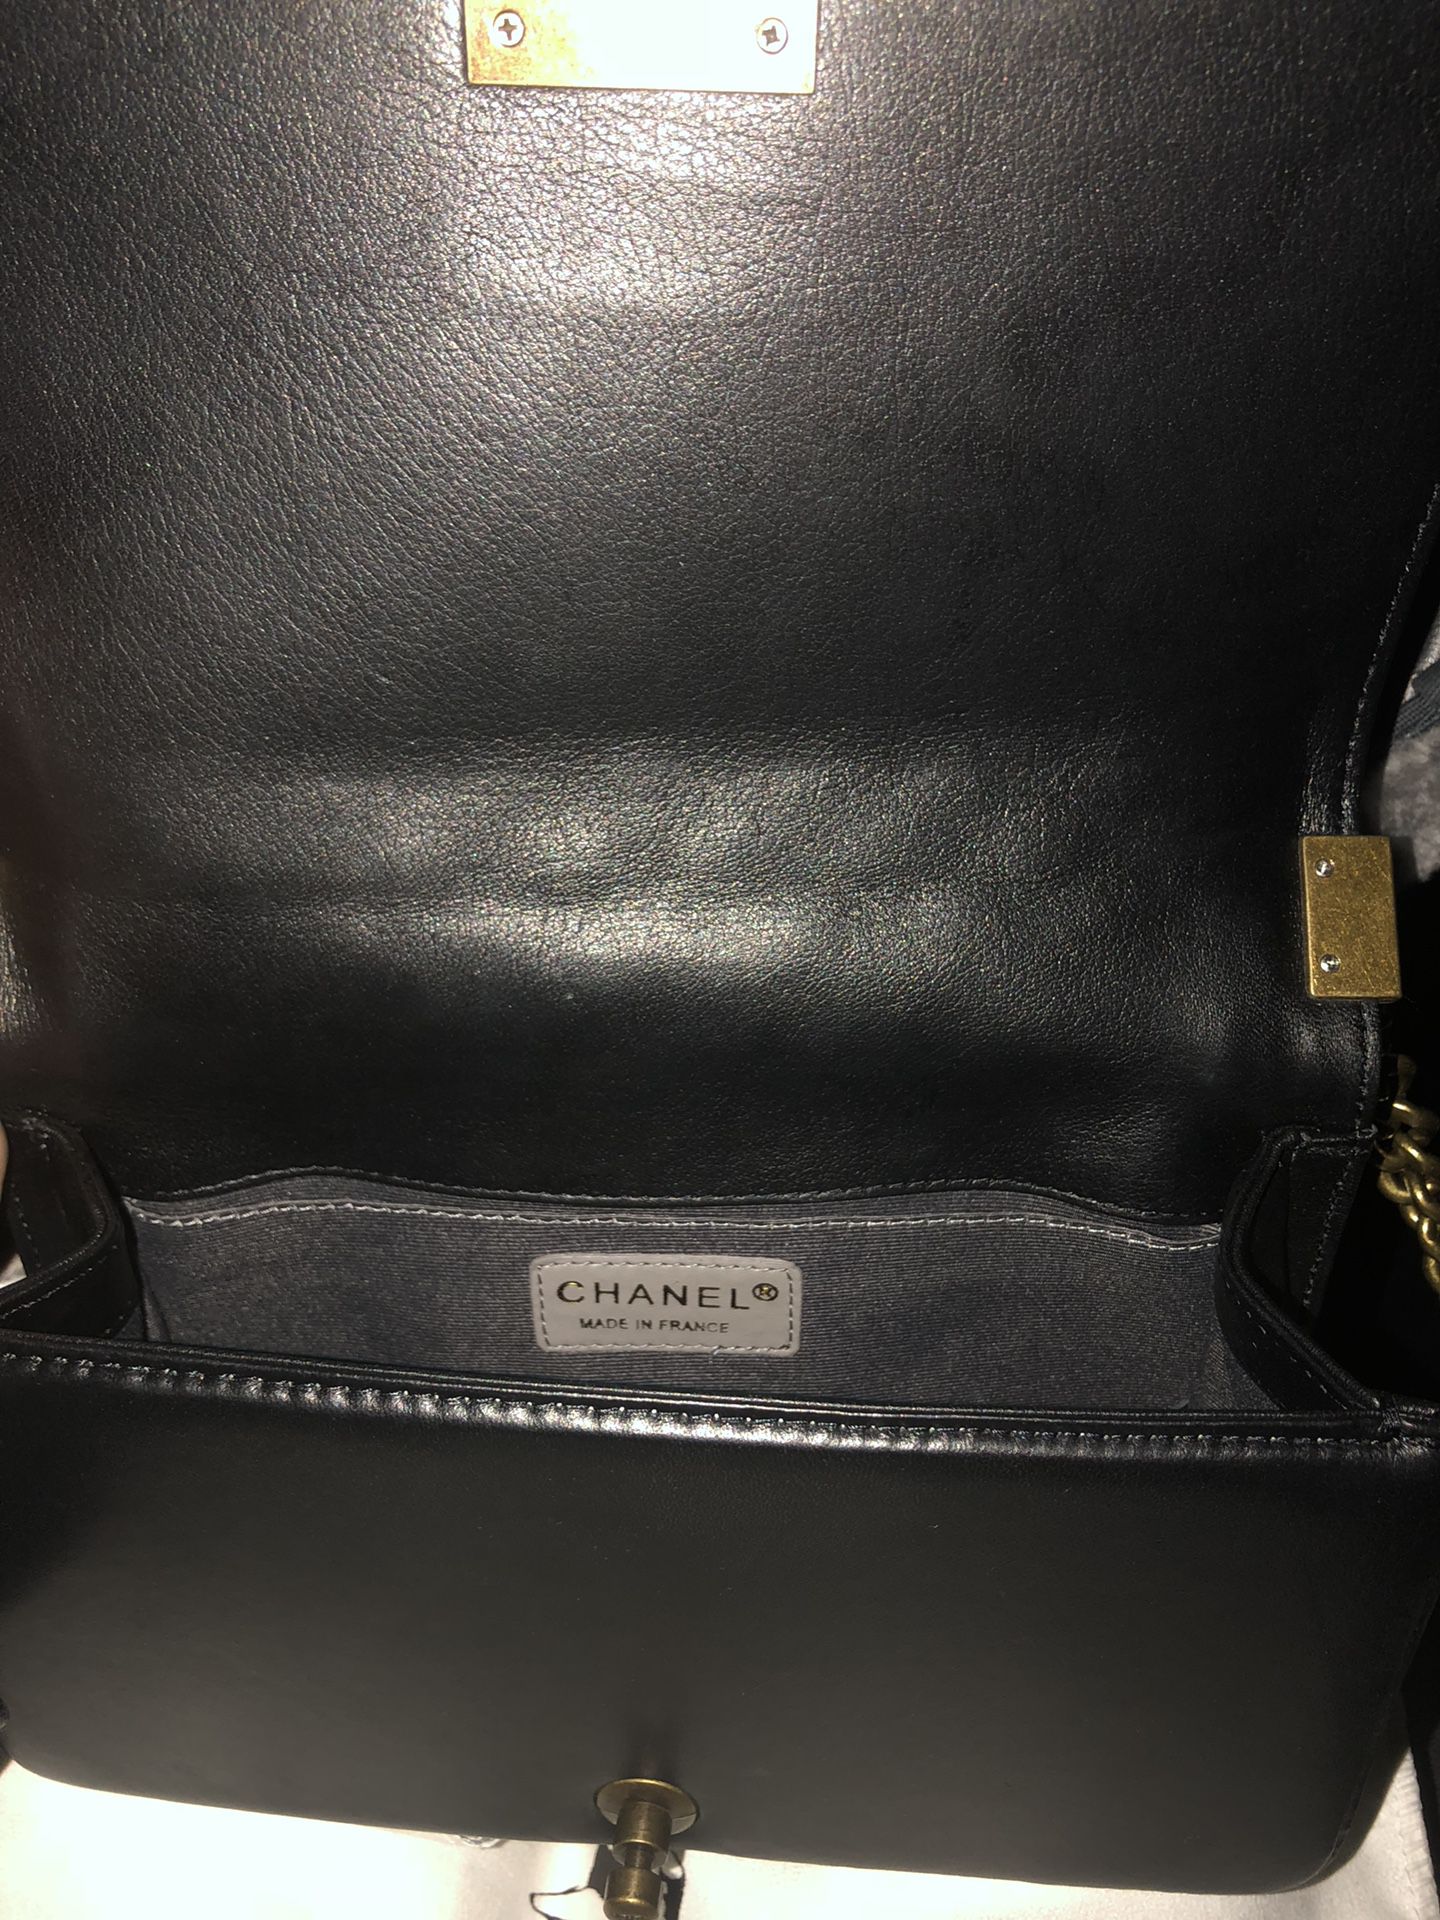 Chanel Boy Bag with Brass gold hardware. Able to ship out today! 10218184  Serial date code for Sale in Port Washington, NY - OfferUp